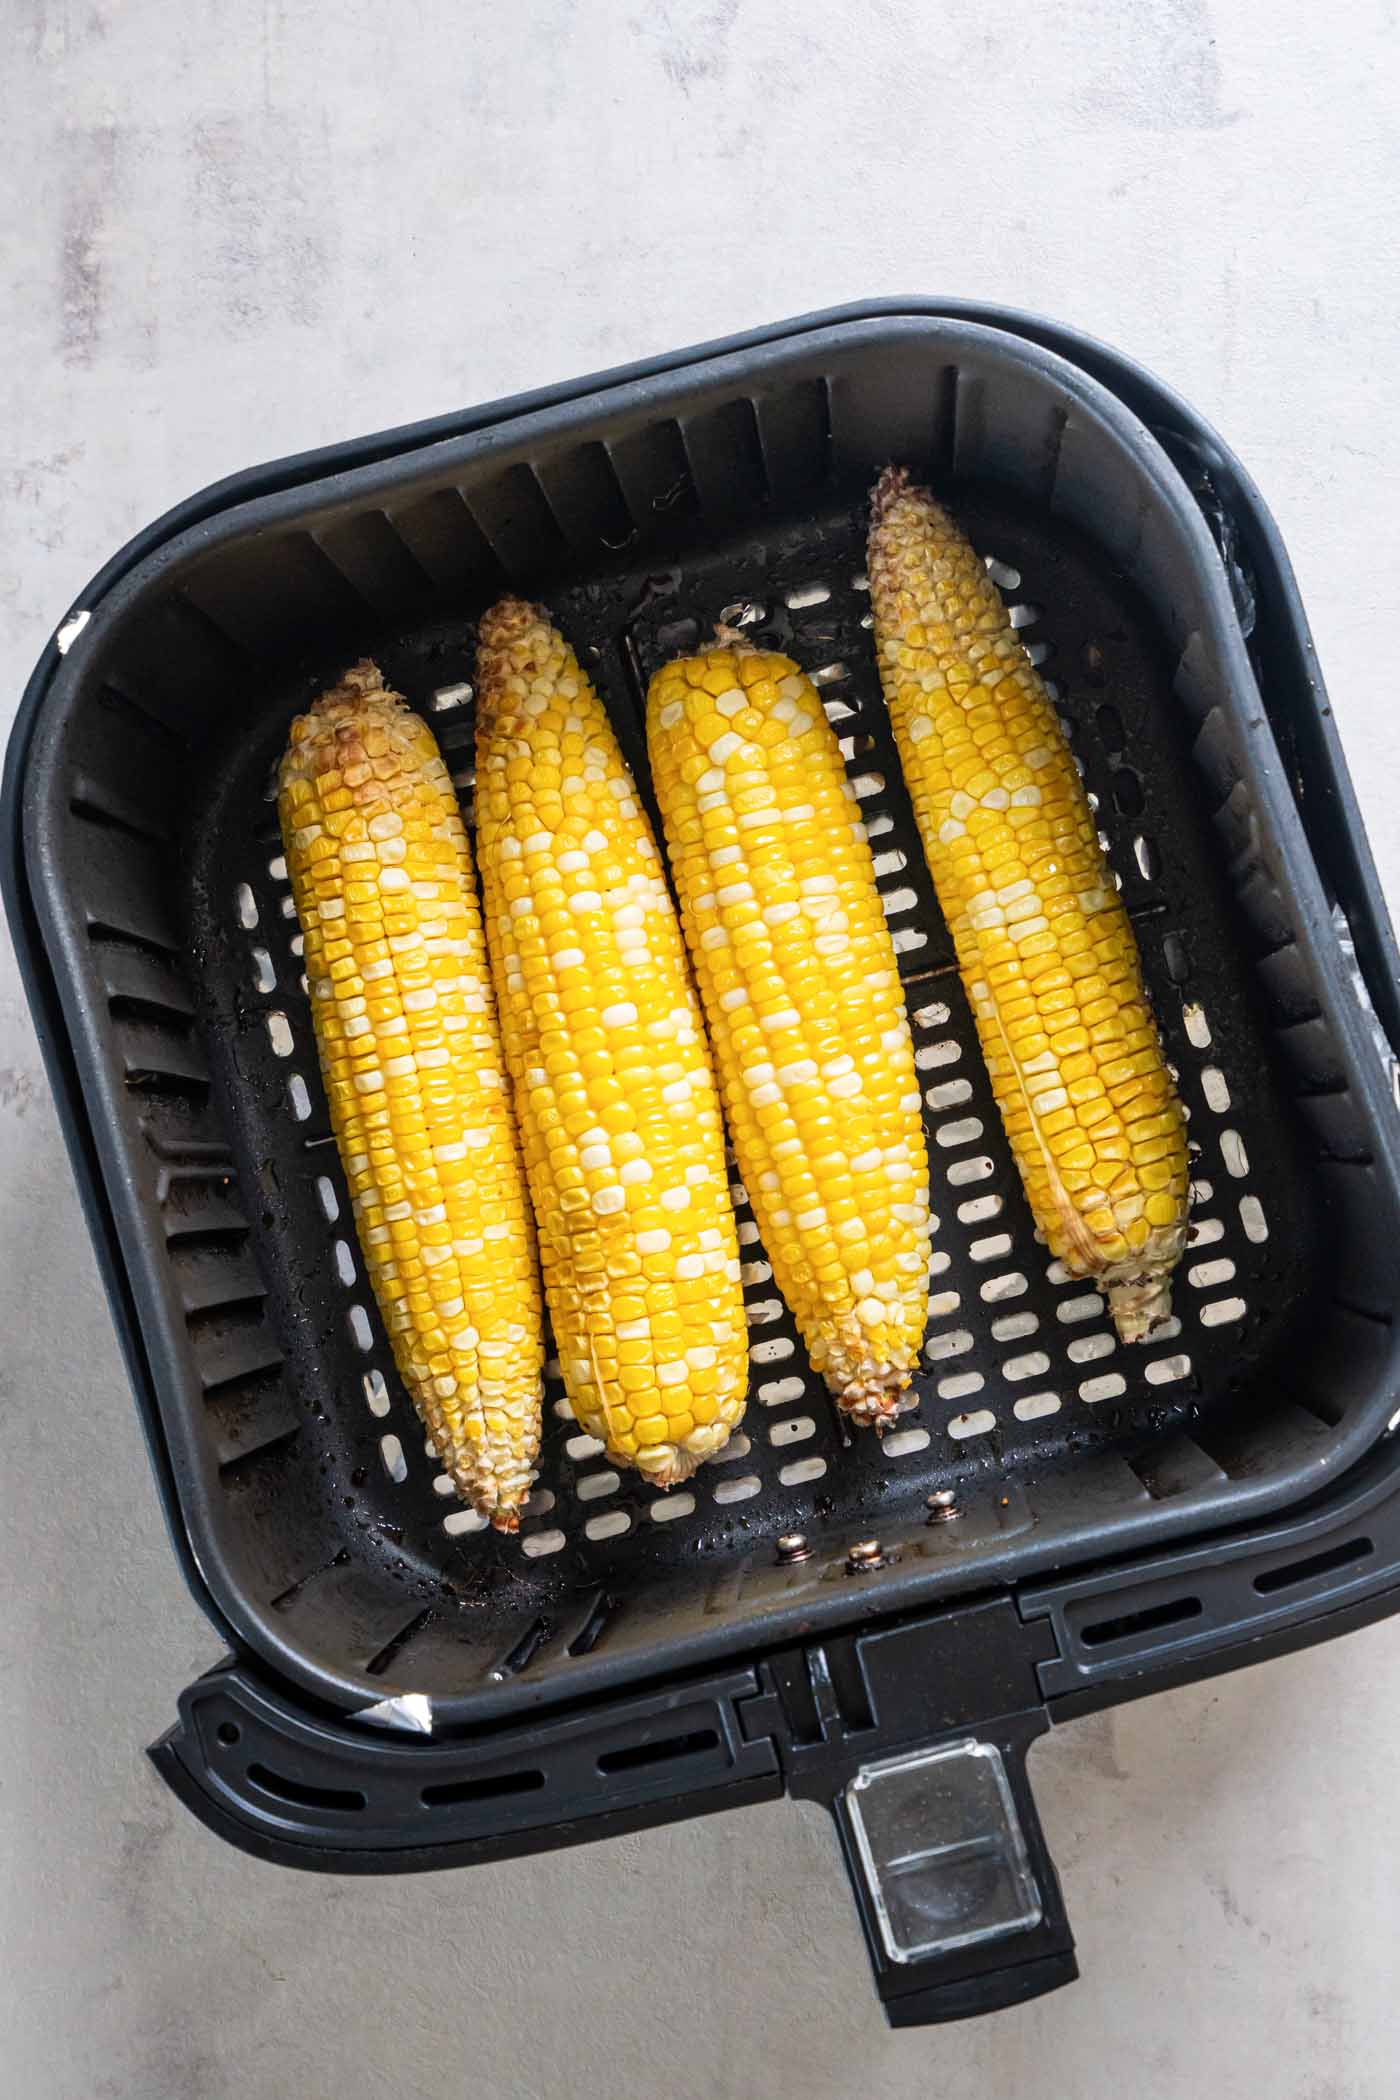 Four cooked ears of corn in an air fryer basket.